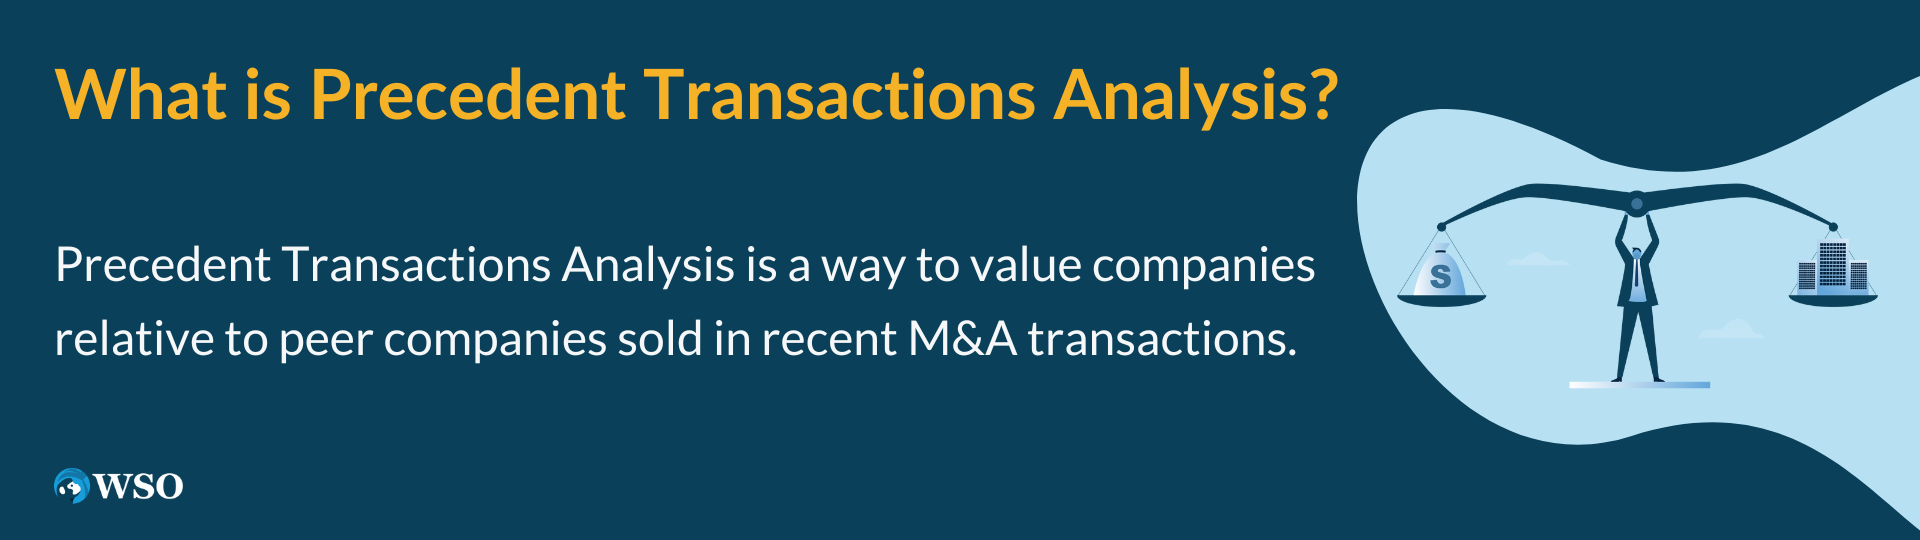 What is Precedent Transactions Analysis?